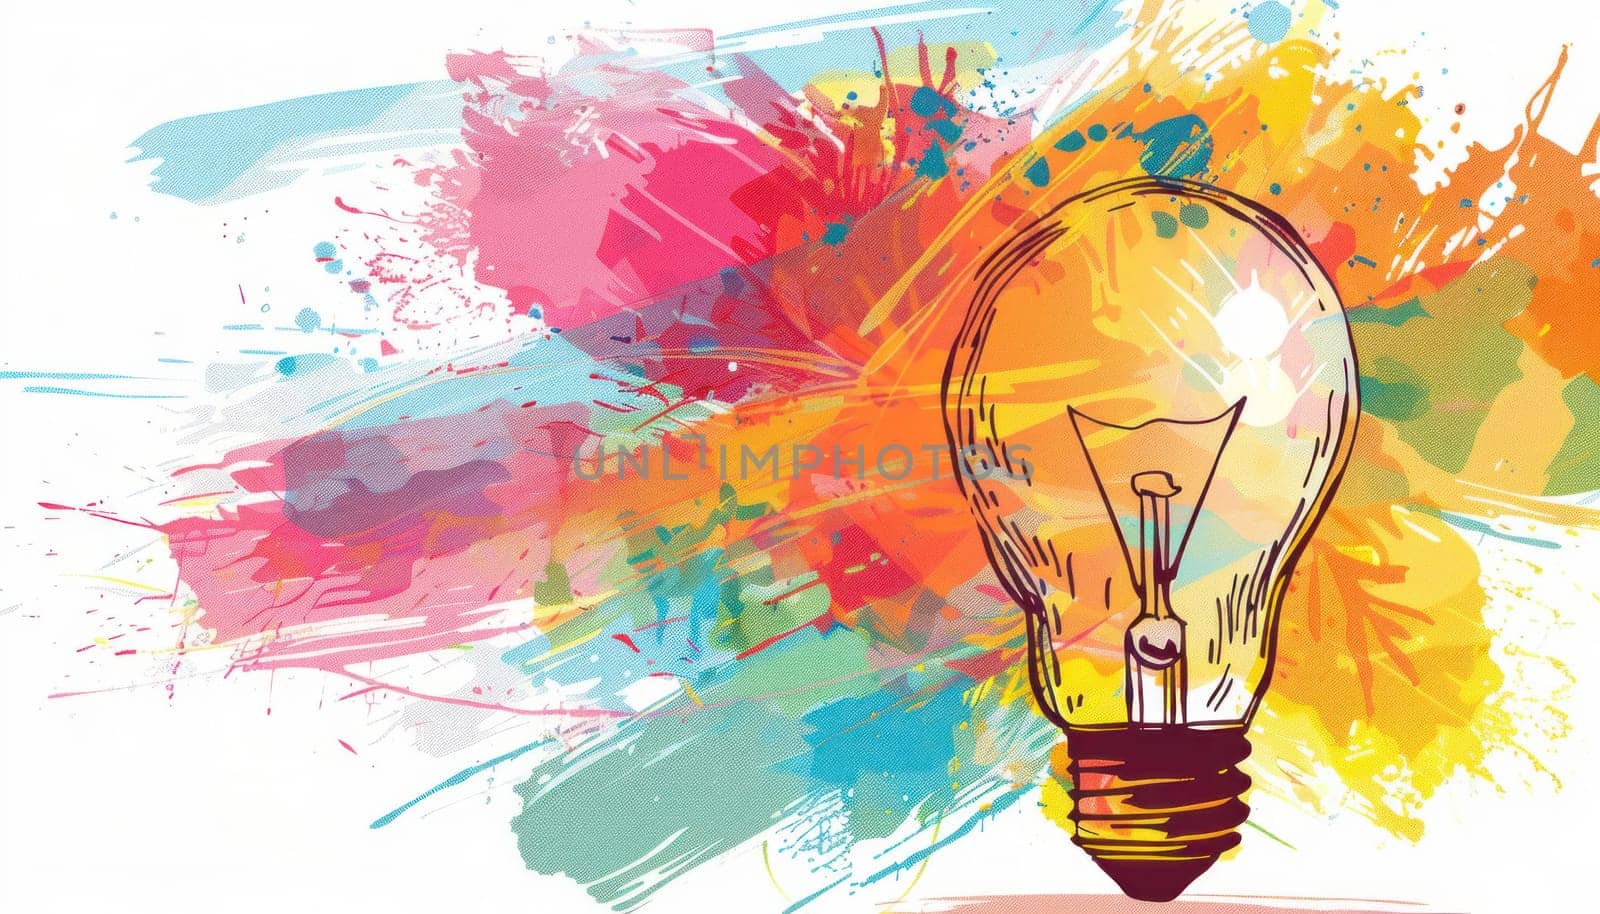 Illuminated idea concept lightbulb with paint splatters on white background for creative business inspiration and art design